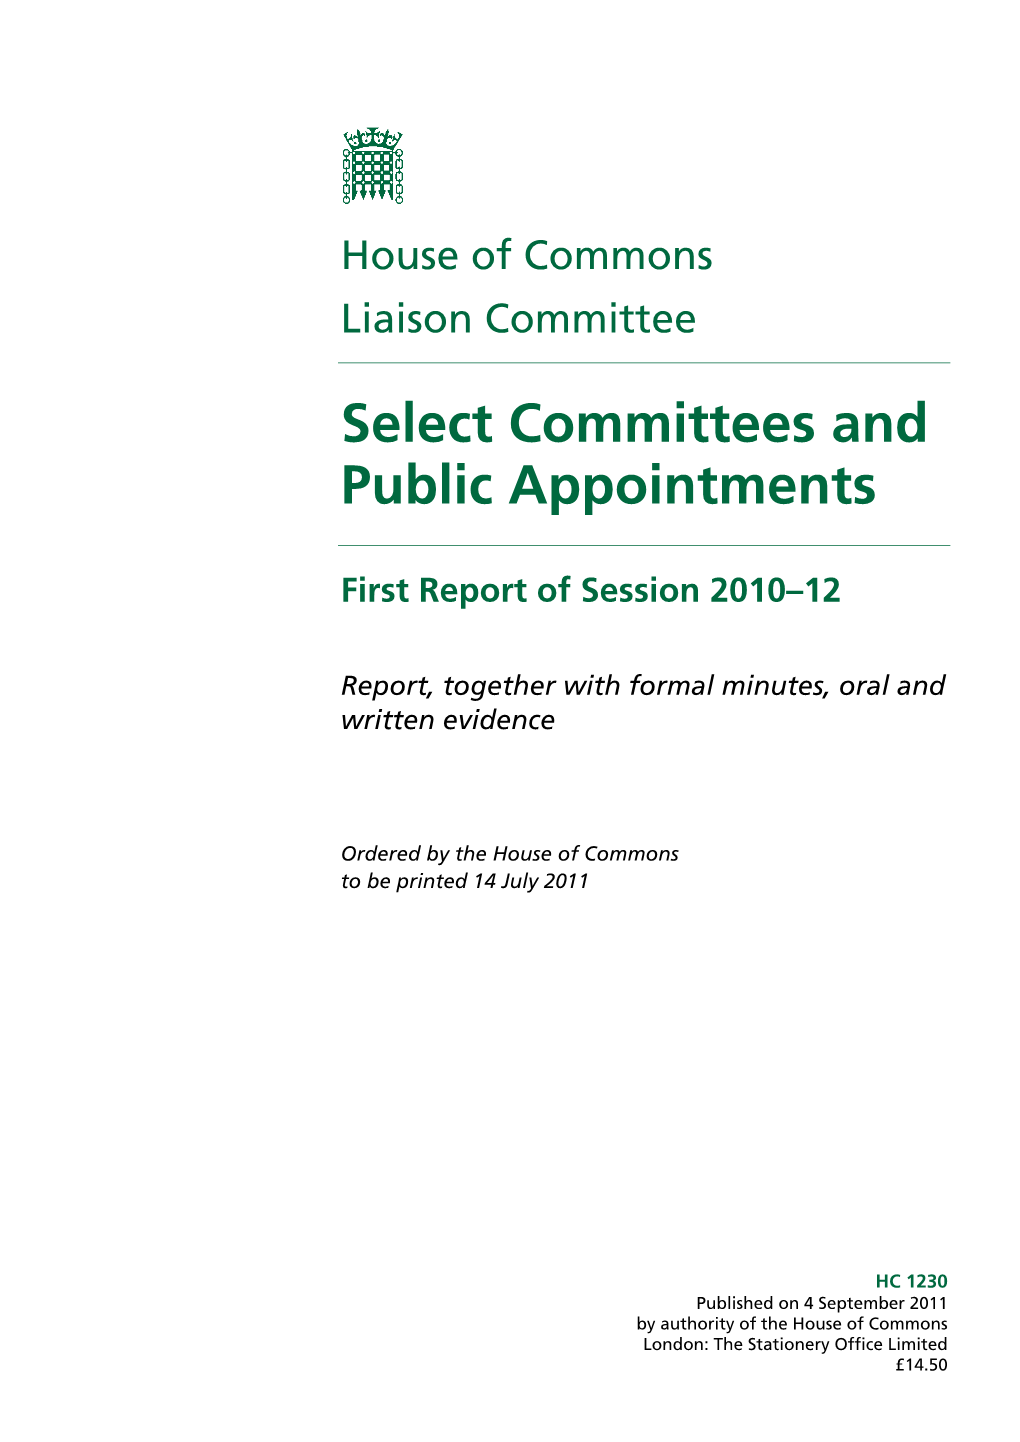 Select Committees and Public Appointments